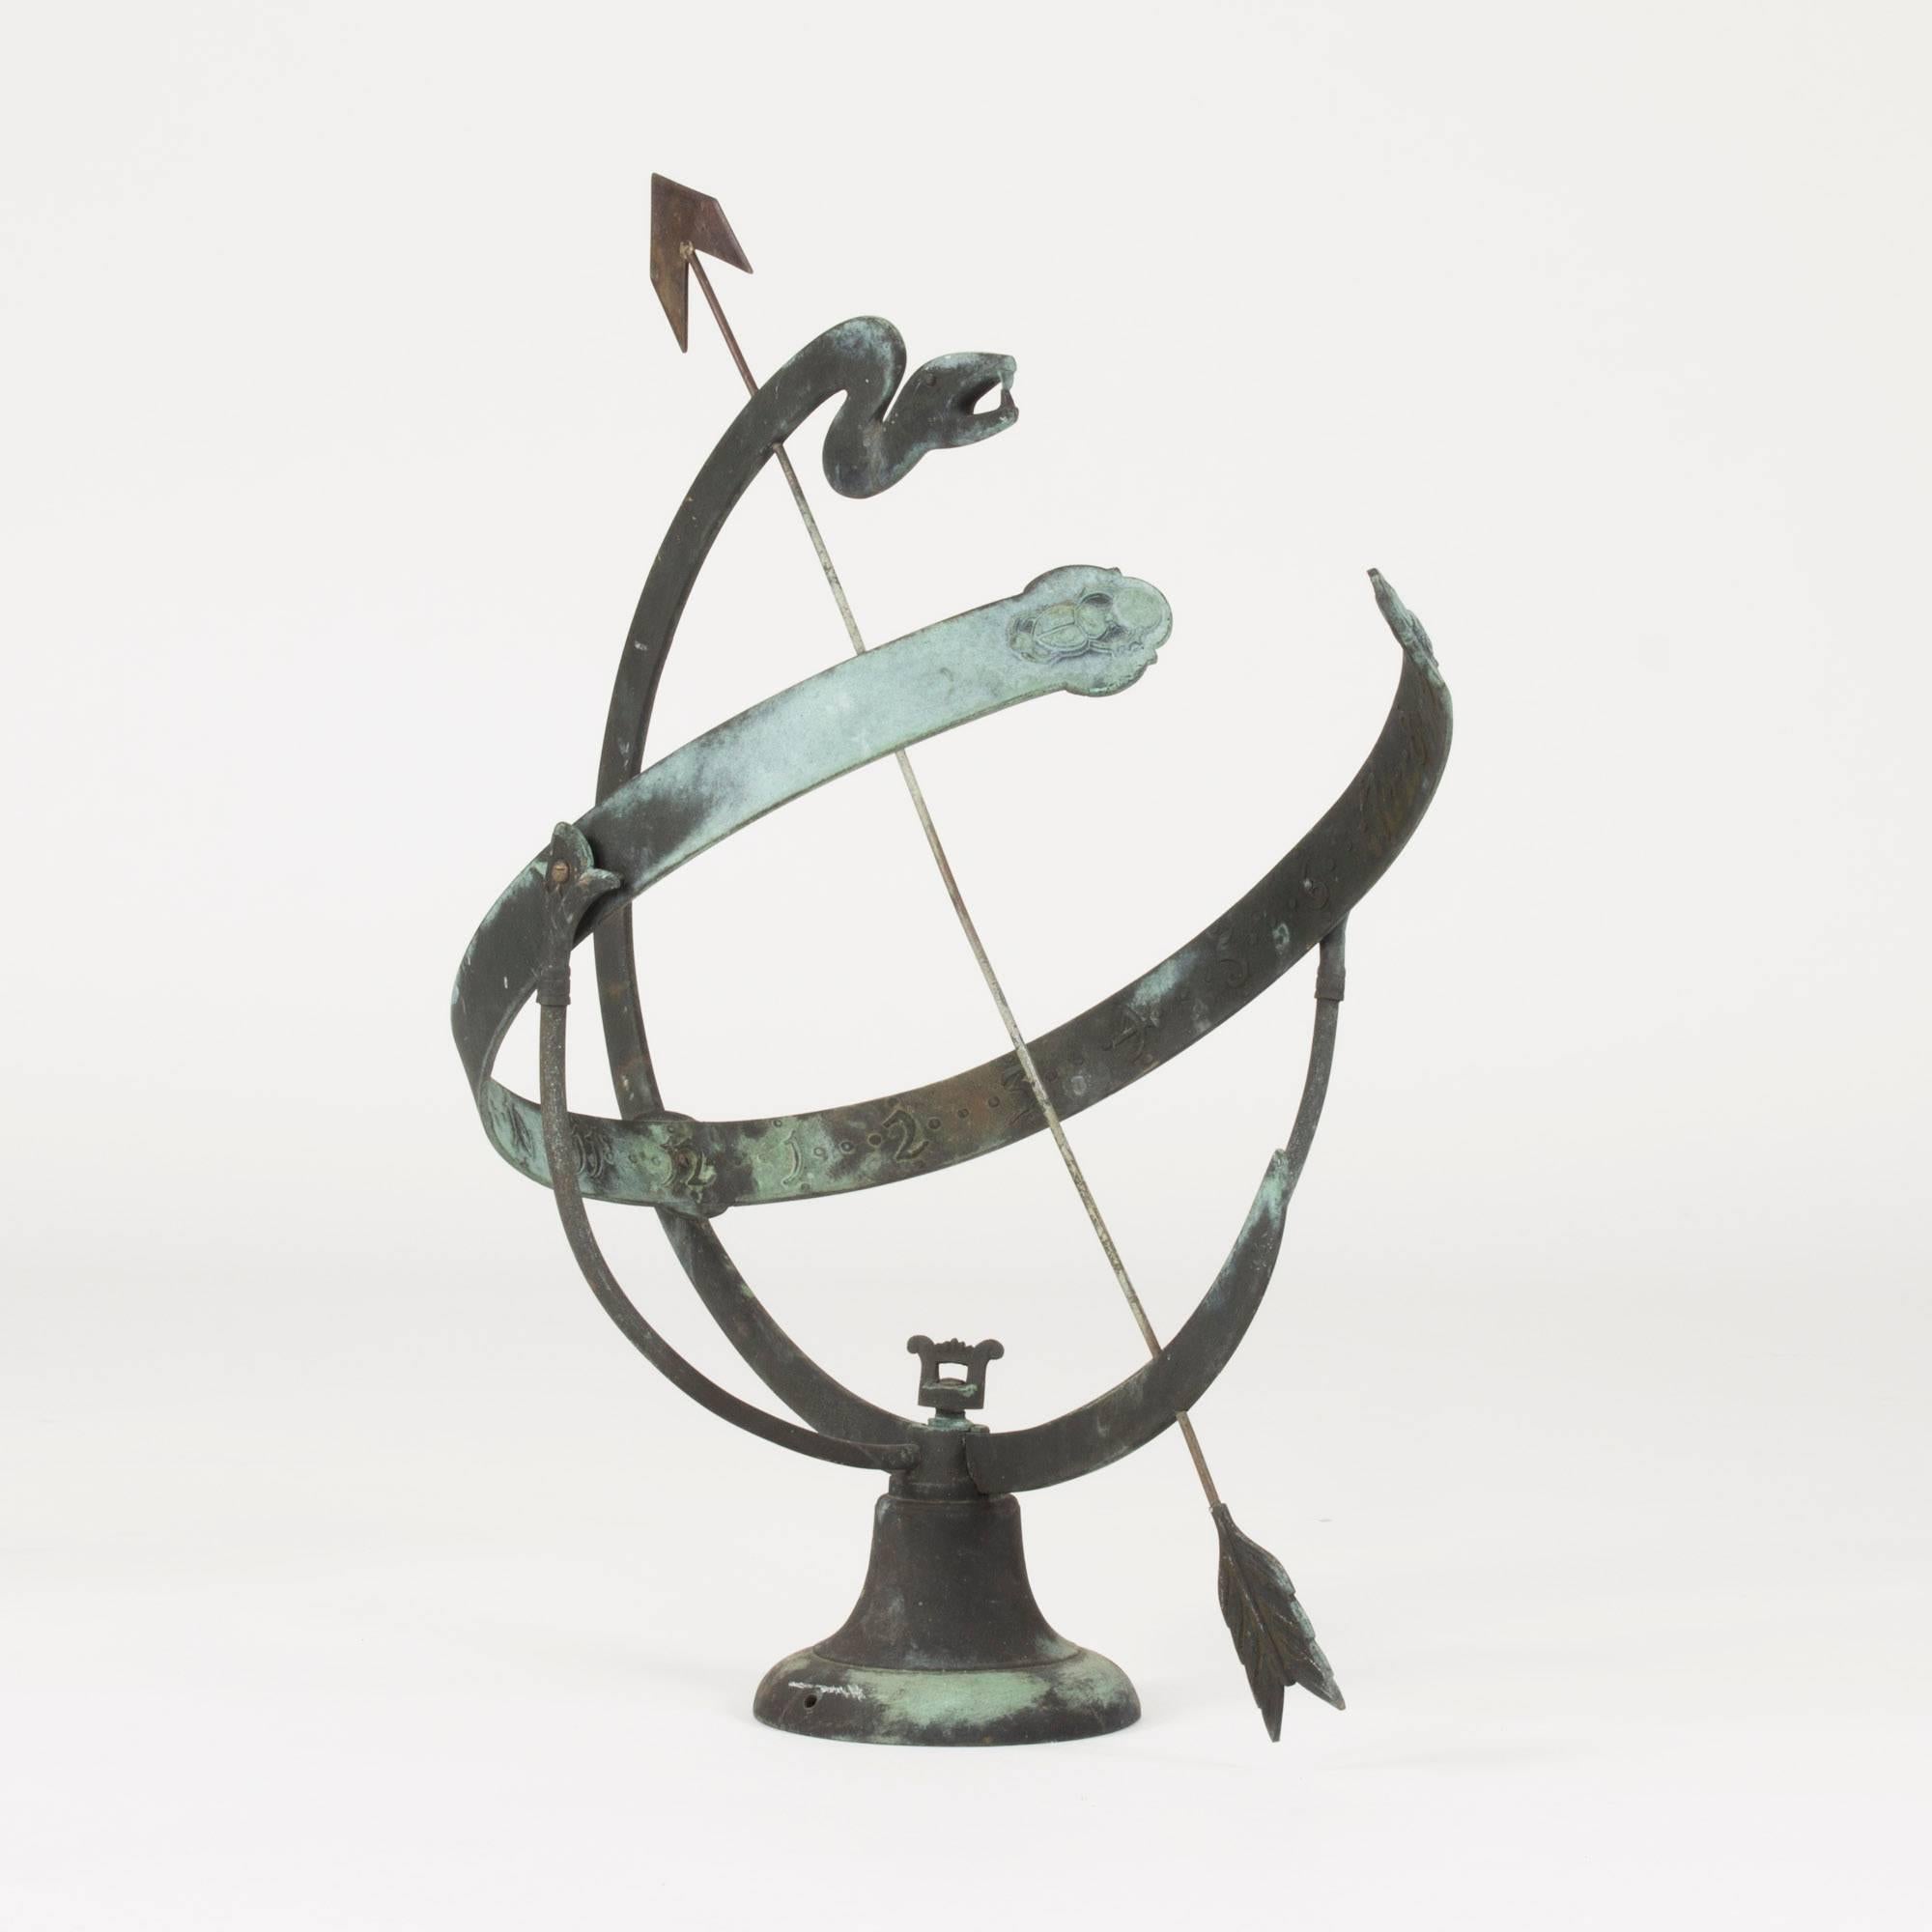 Gorgeous Swedish, 1920s sundial in bronze. A stylized serpent as frame and the entire piece full of incredible details such as the Egyptian scarab beetles etched into the number-arms. This top-quality bronze beauty represents Neoclassicism at its